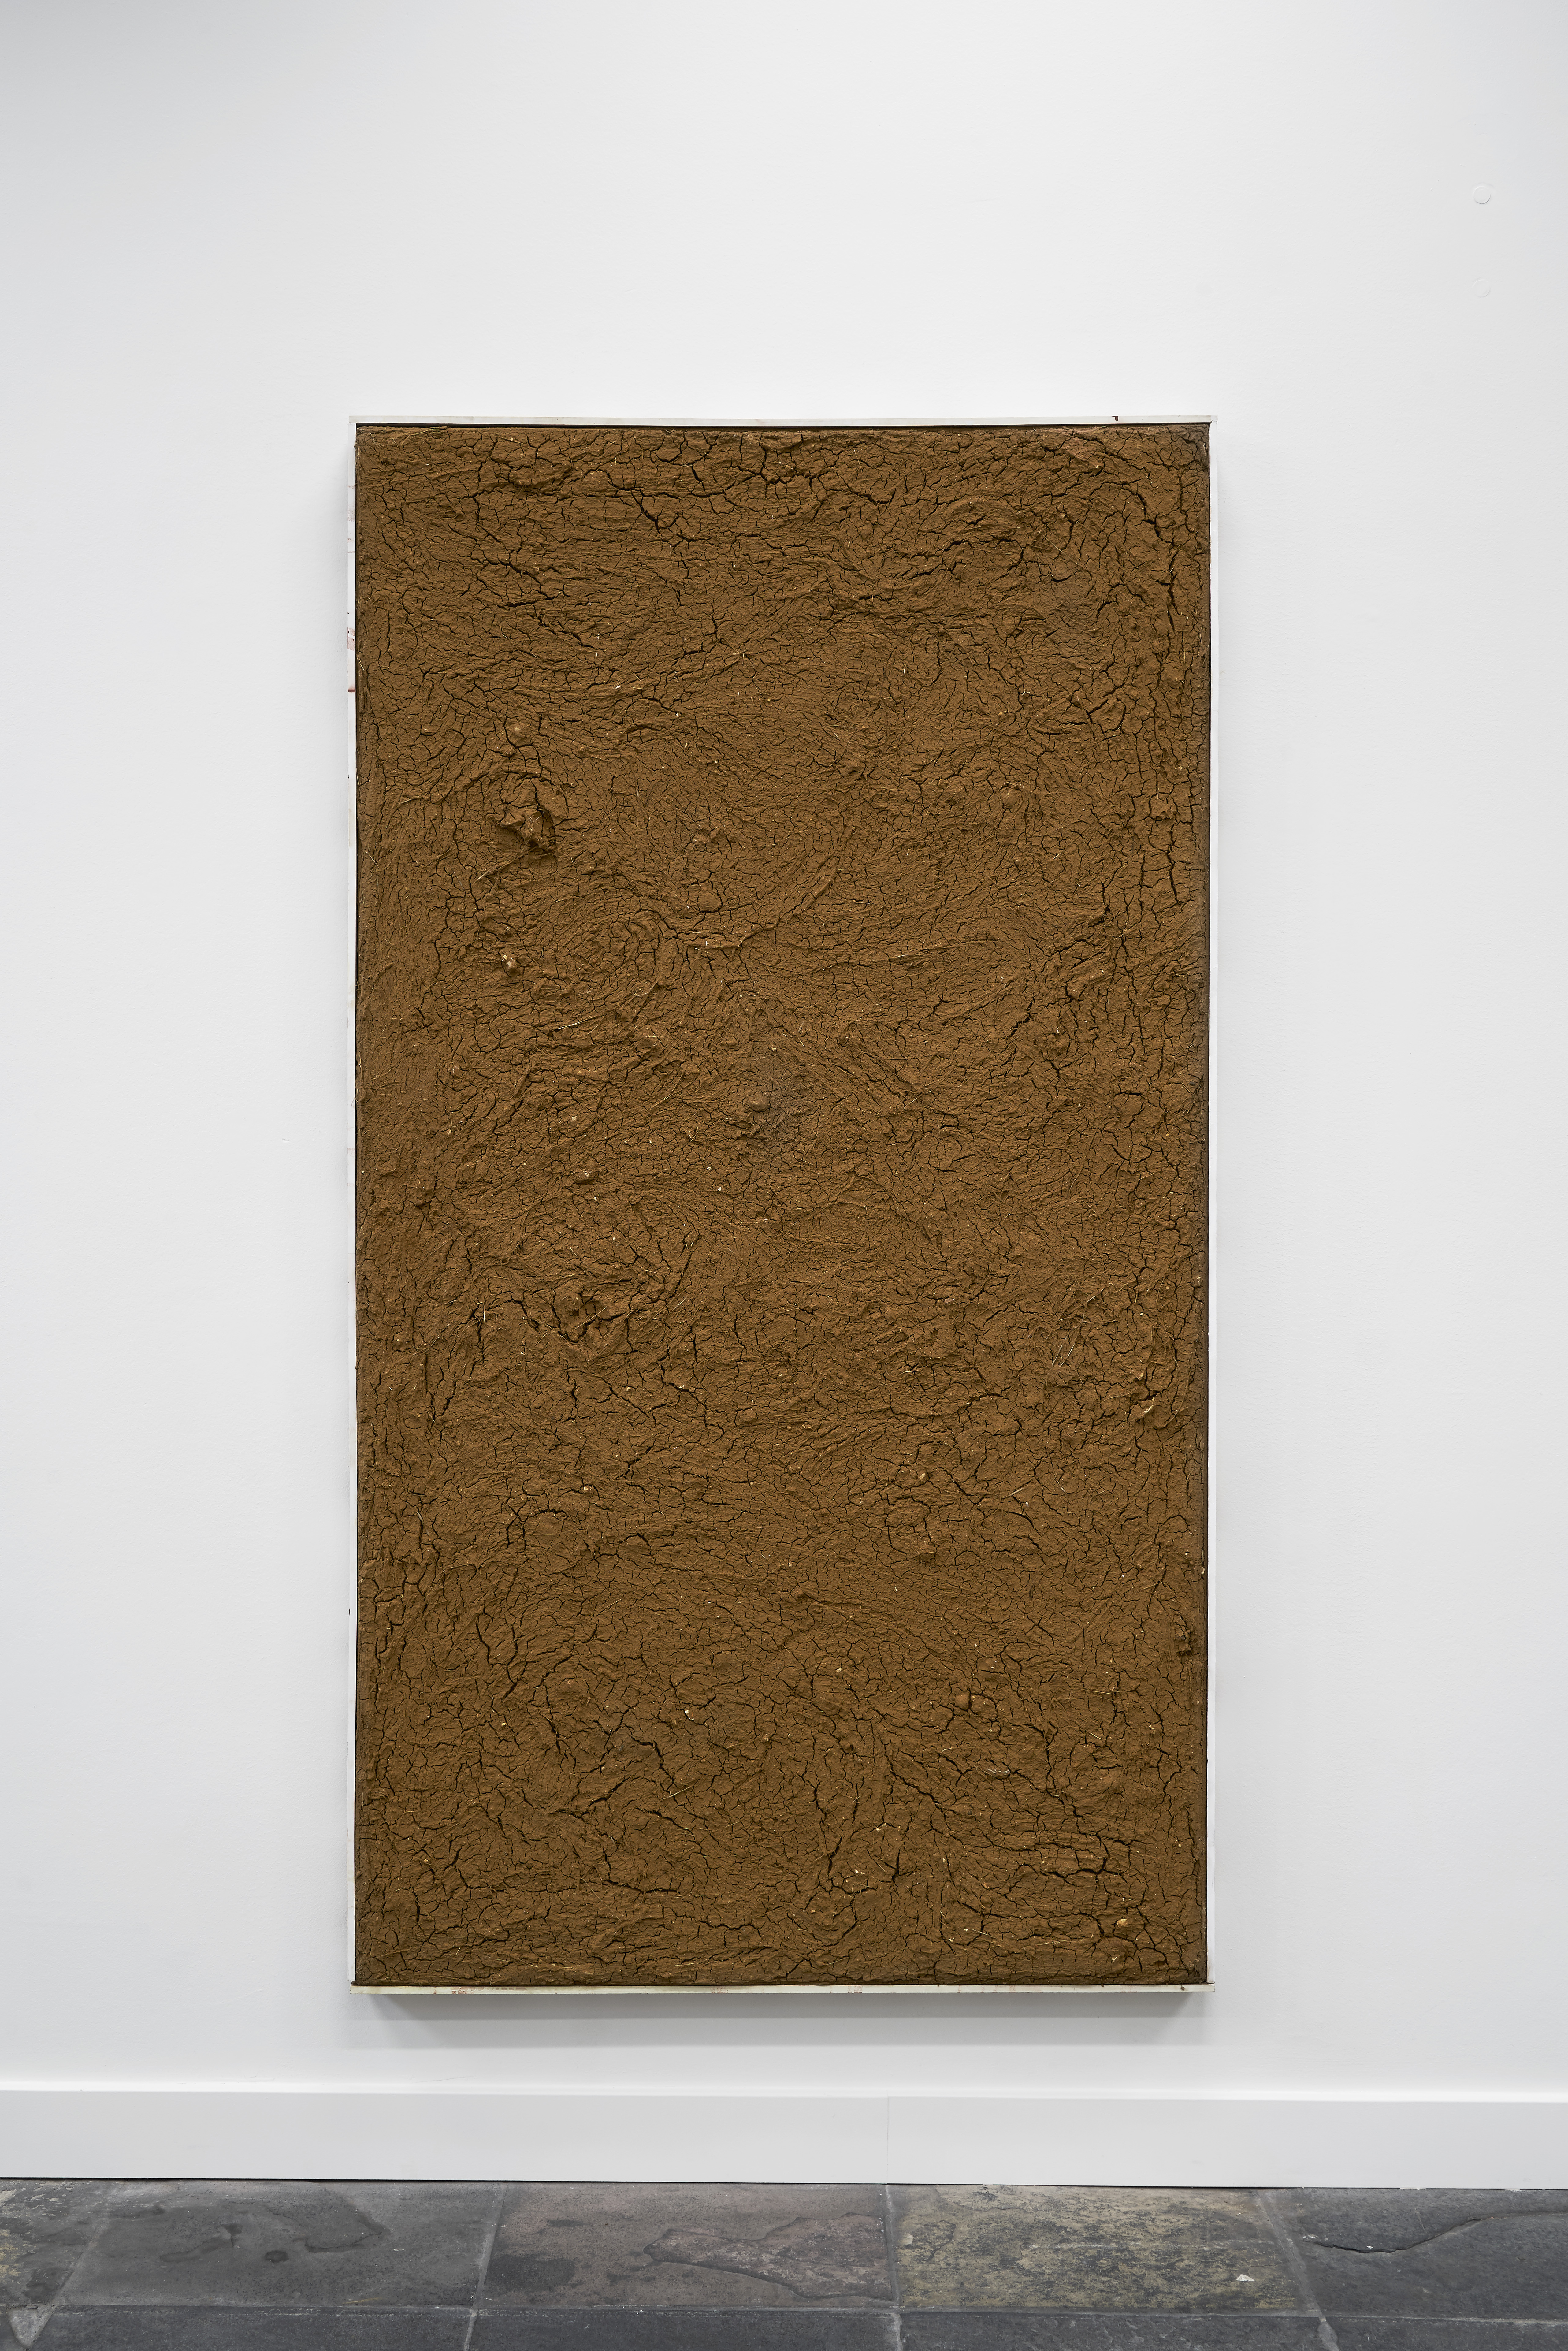 Hand dug and hand filtered Wiltshire clay on hessian, spray paint & pine, 205 x 112 x 5cm, 2021.